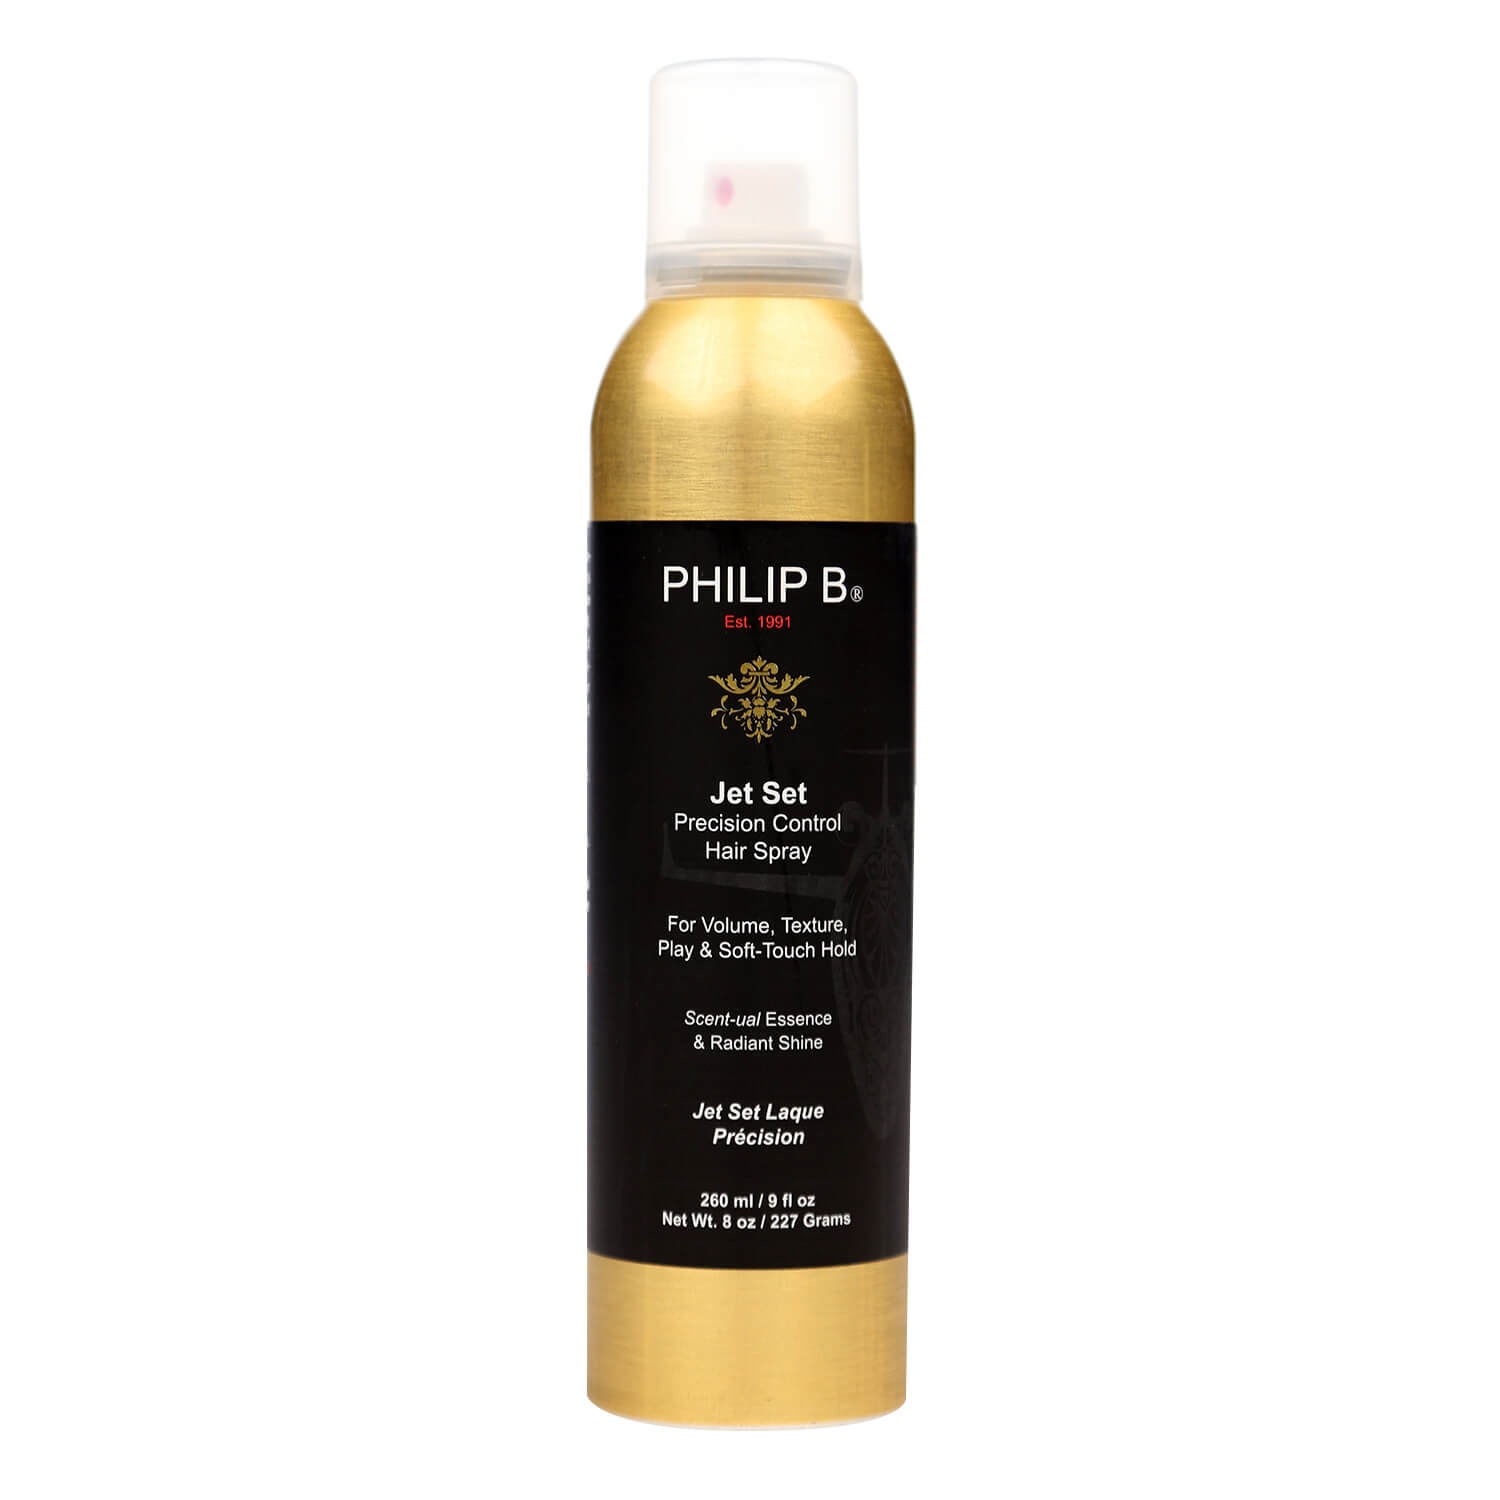 Product image from Philip B - Jet Set Precision Control Hair Spray